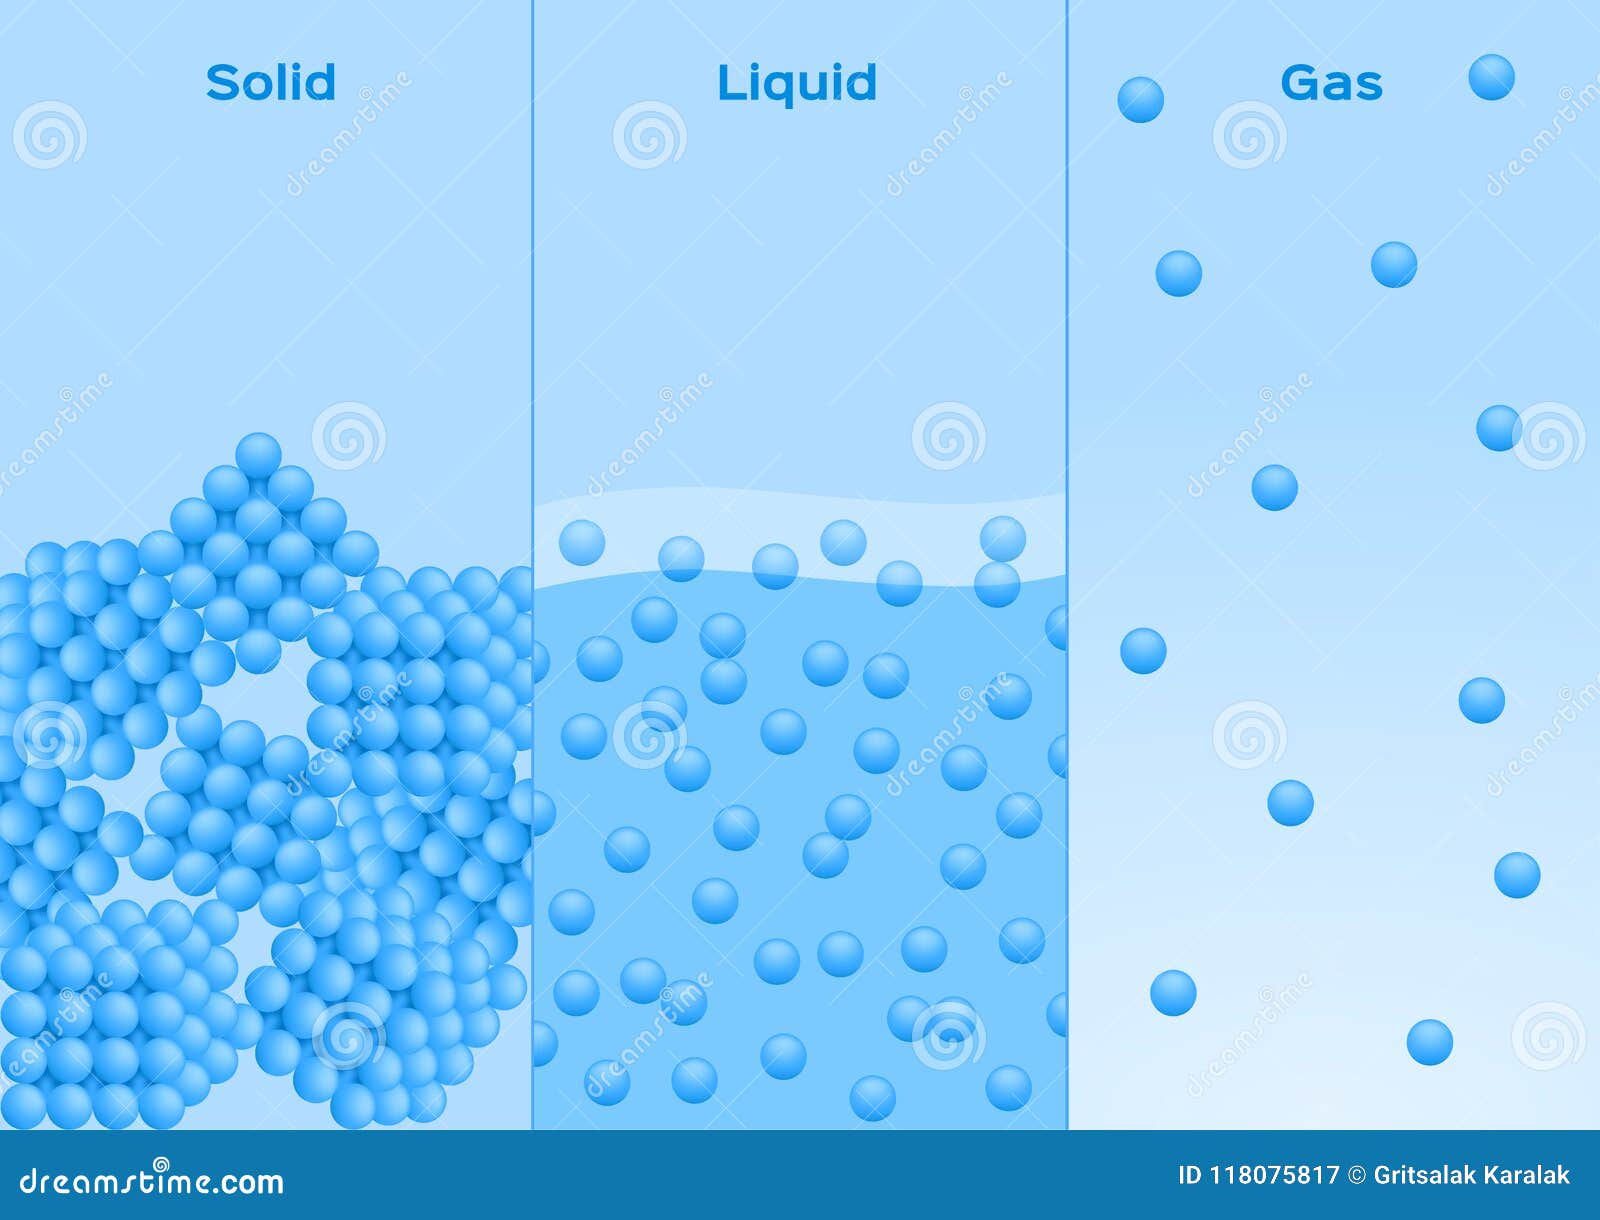 states of matter . solid , liquid and gas 